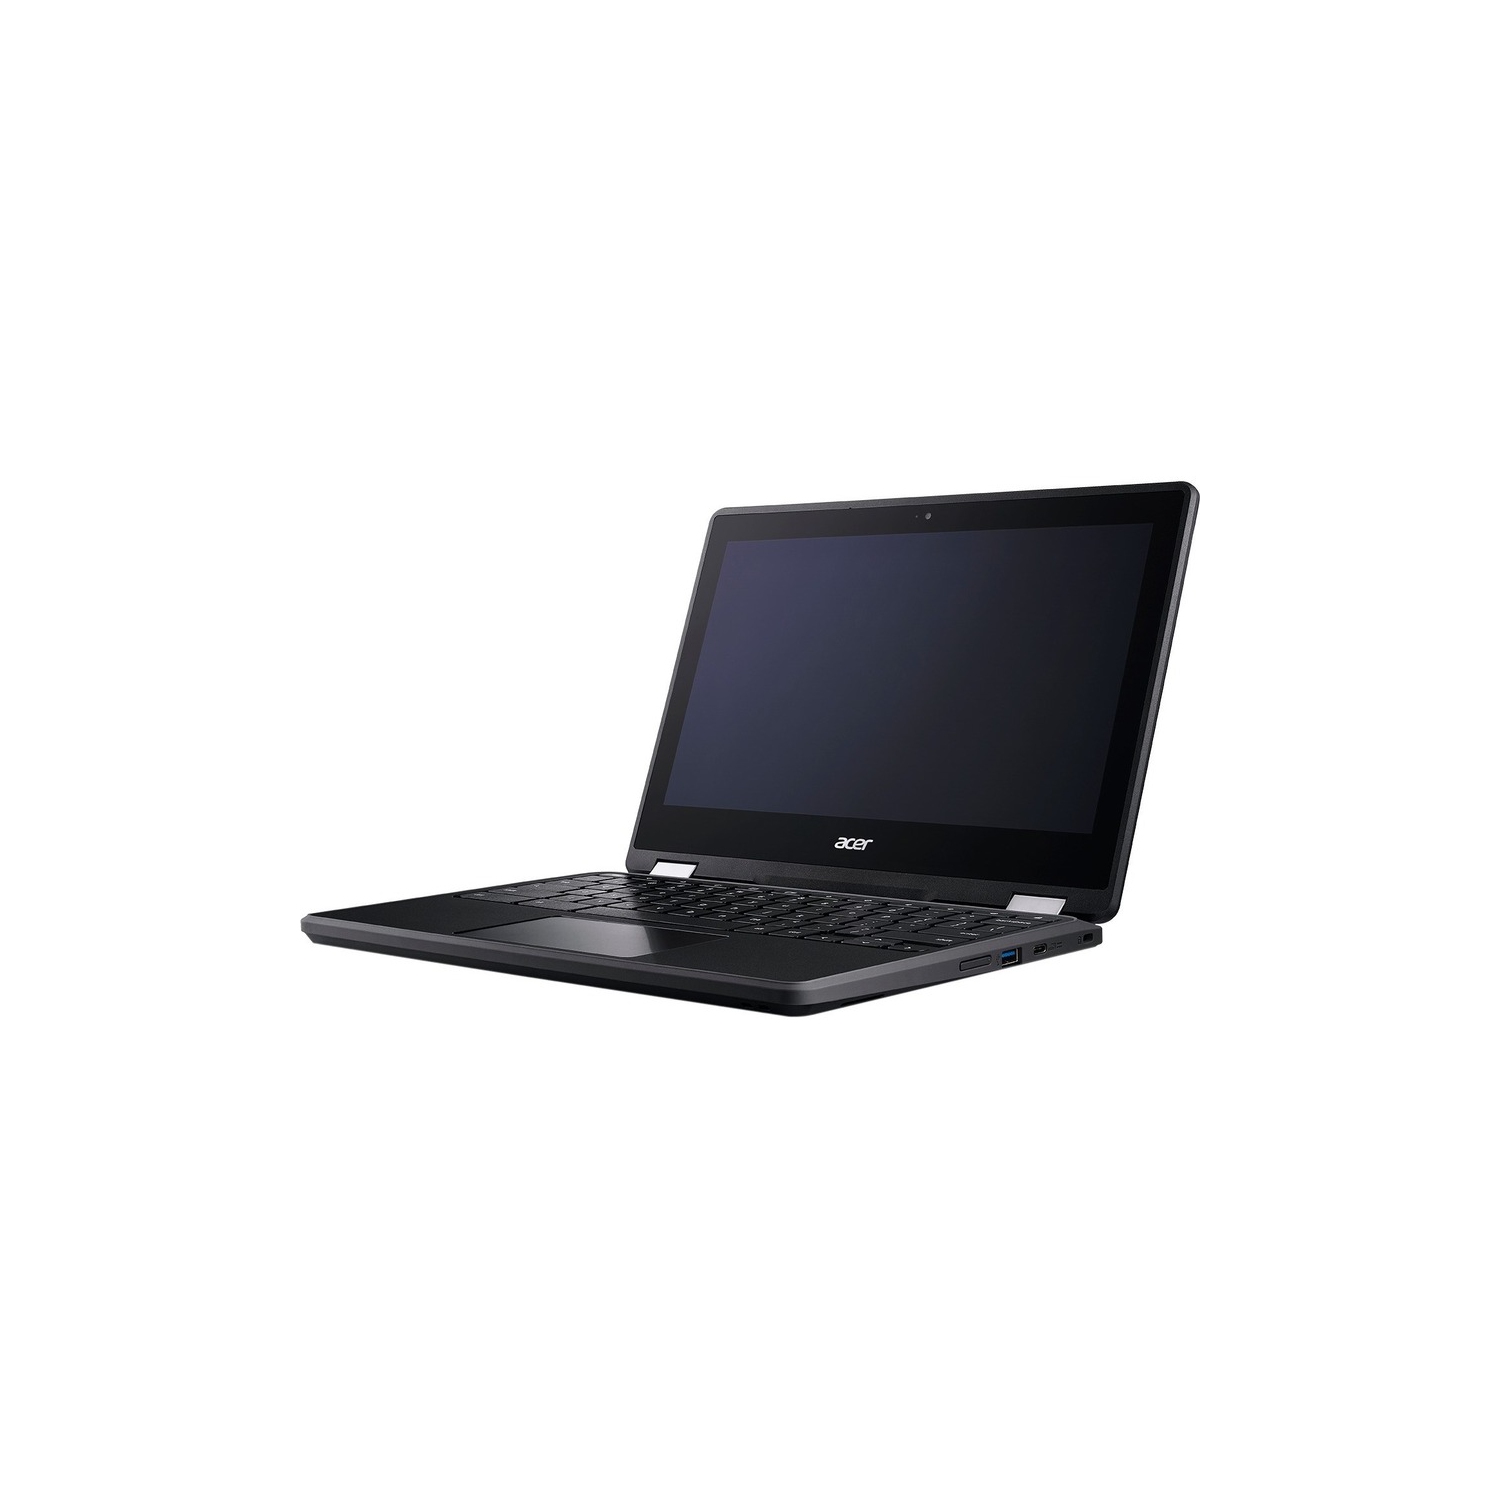 Refurbished (Good) - Acer Spin 11 R751T 11.6" Touchscreen 2 in 1 Chromebook Intel N3350 4 GB LPDDR4 Chrome OS